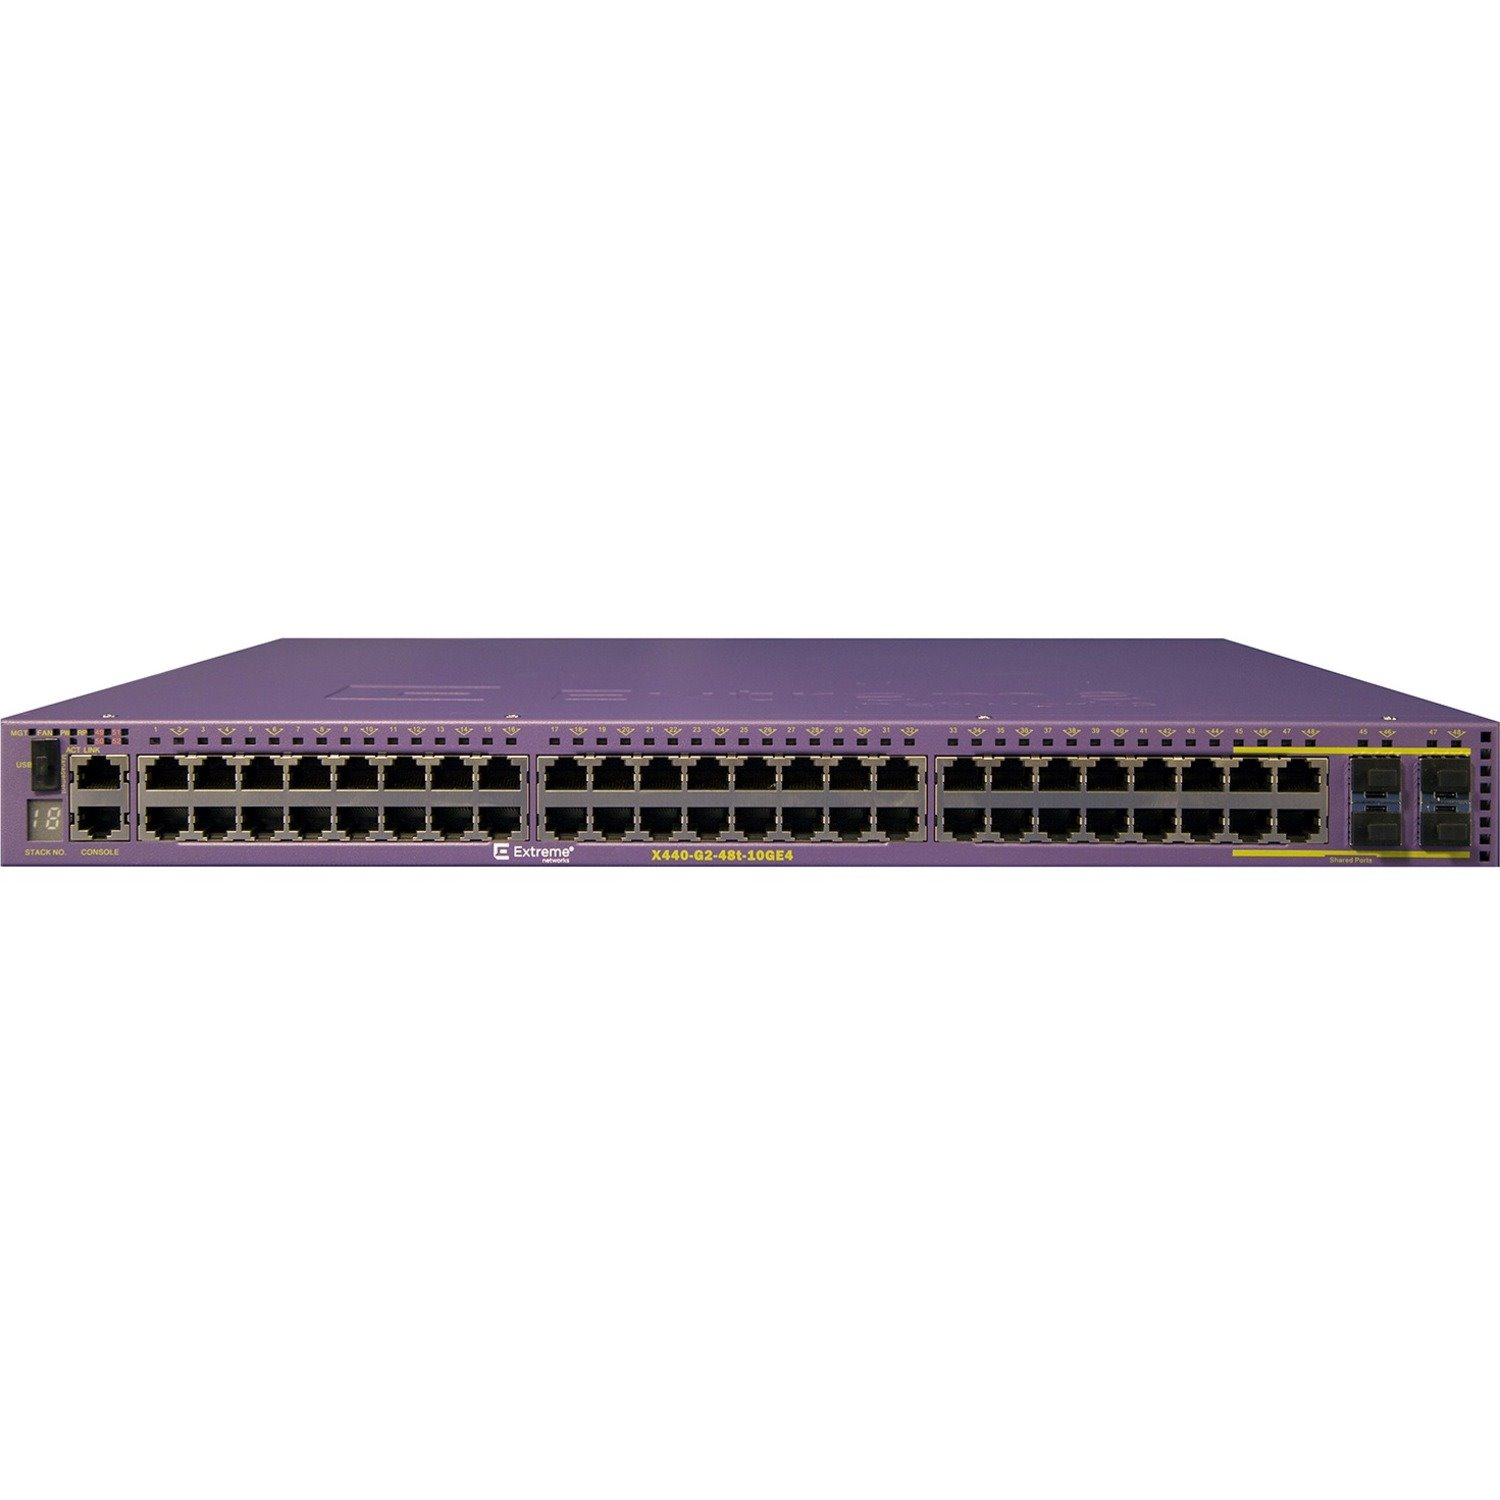 Extreme Networks X440-G2-48t-10GE4 Ethernet Switch